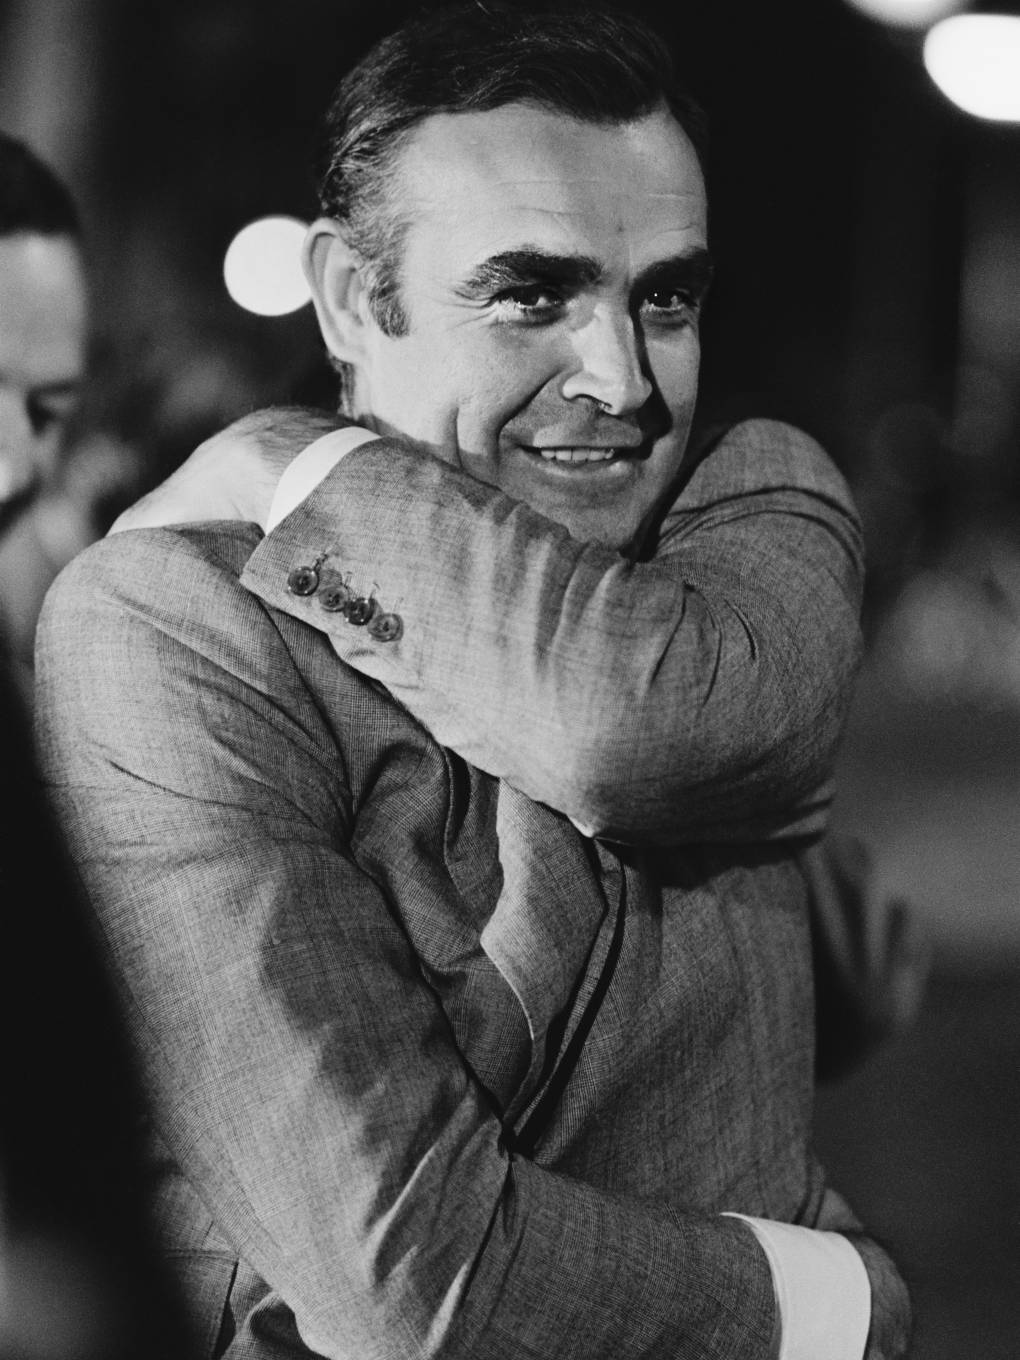 Sean Connery, pictured in Amsterdam during the 1971 filming of 'Diamonds Are Forever,' played James Bond in seven movies.